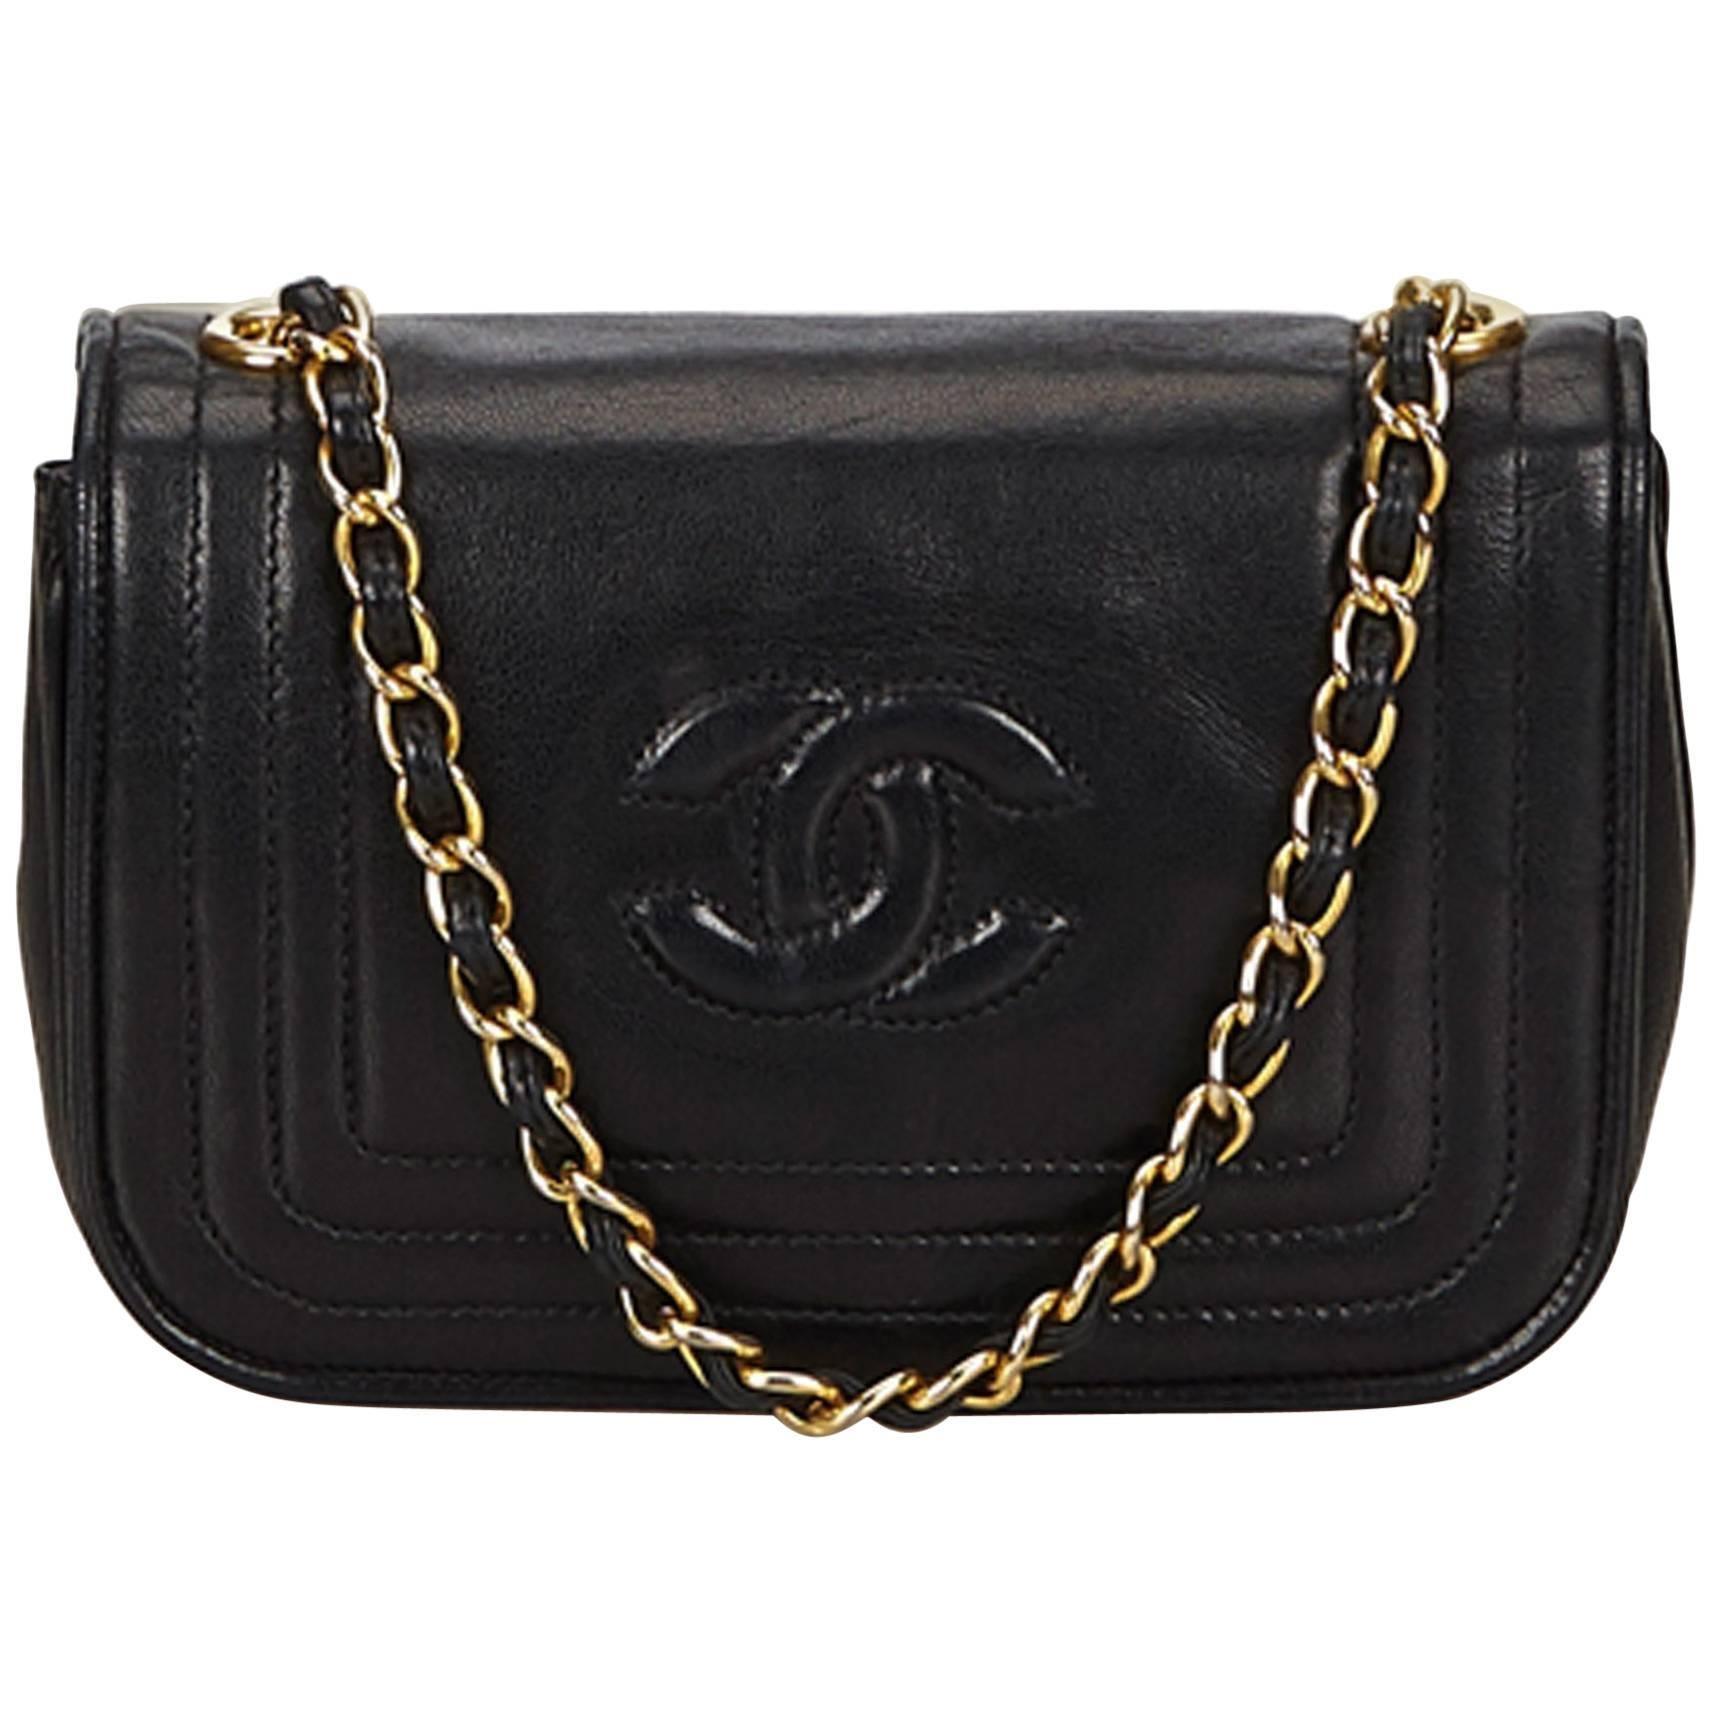 Chanel Black Lambskin Straight Stitch Details with "CC" Flap Gold Chain Bag 